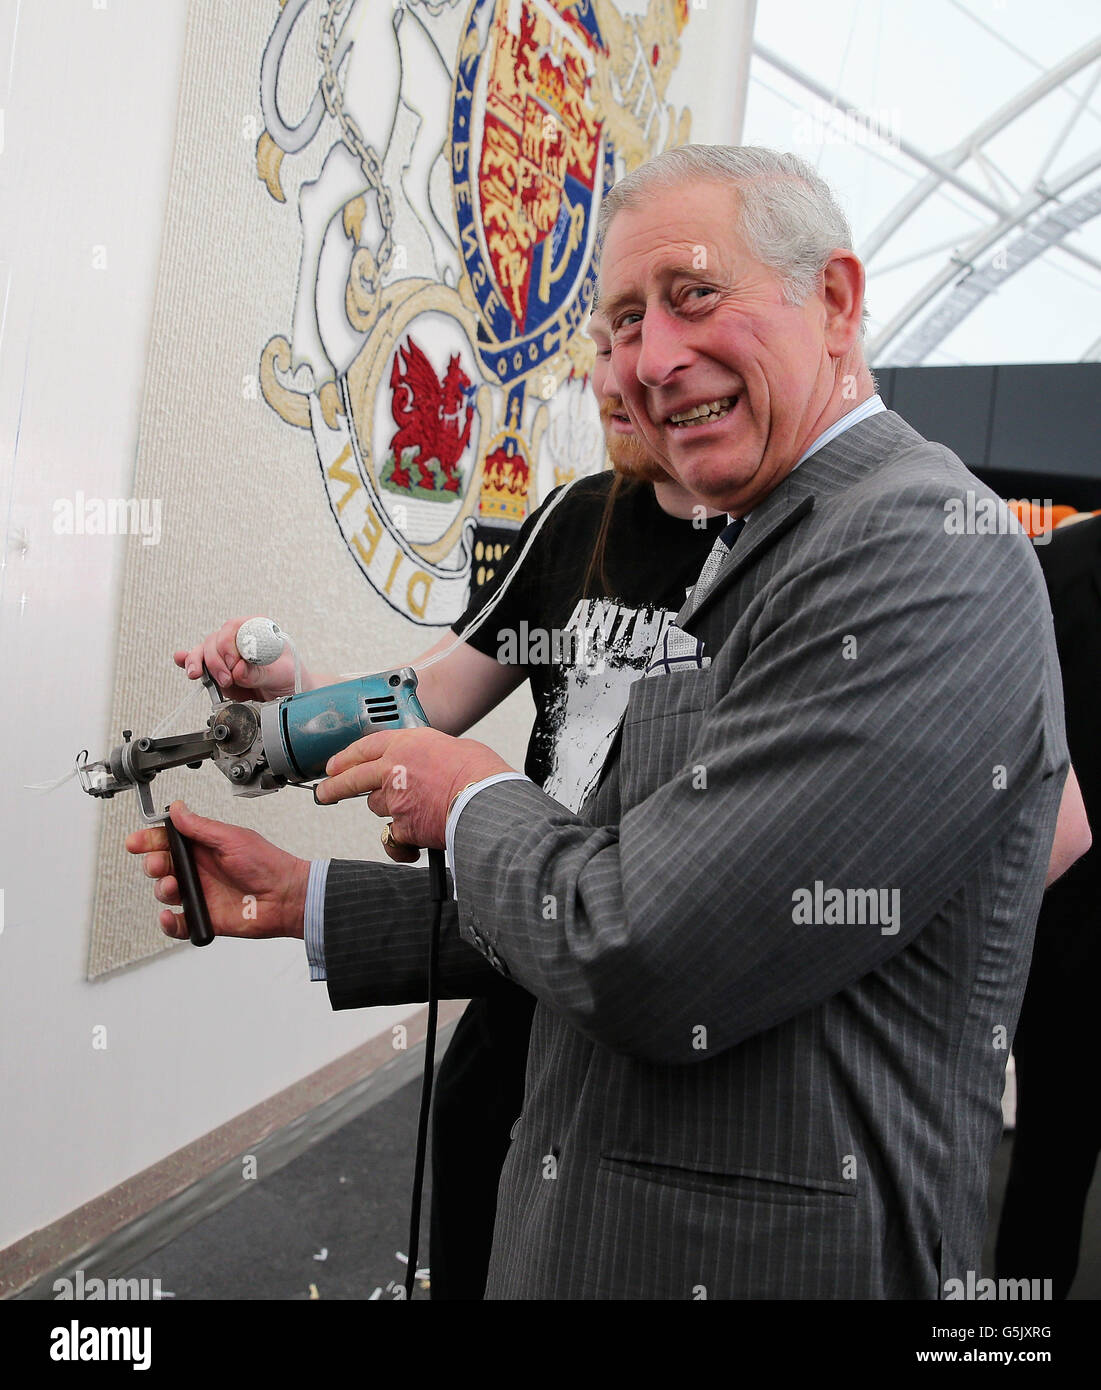 The Prince of Wales uses a 'tufting gun' to work on a wool carpet featuring the royal crest at a New Zealand Sheer Brilliance event in the Cloud in Auckland, New Zealand. Stock Photo